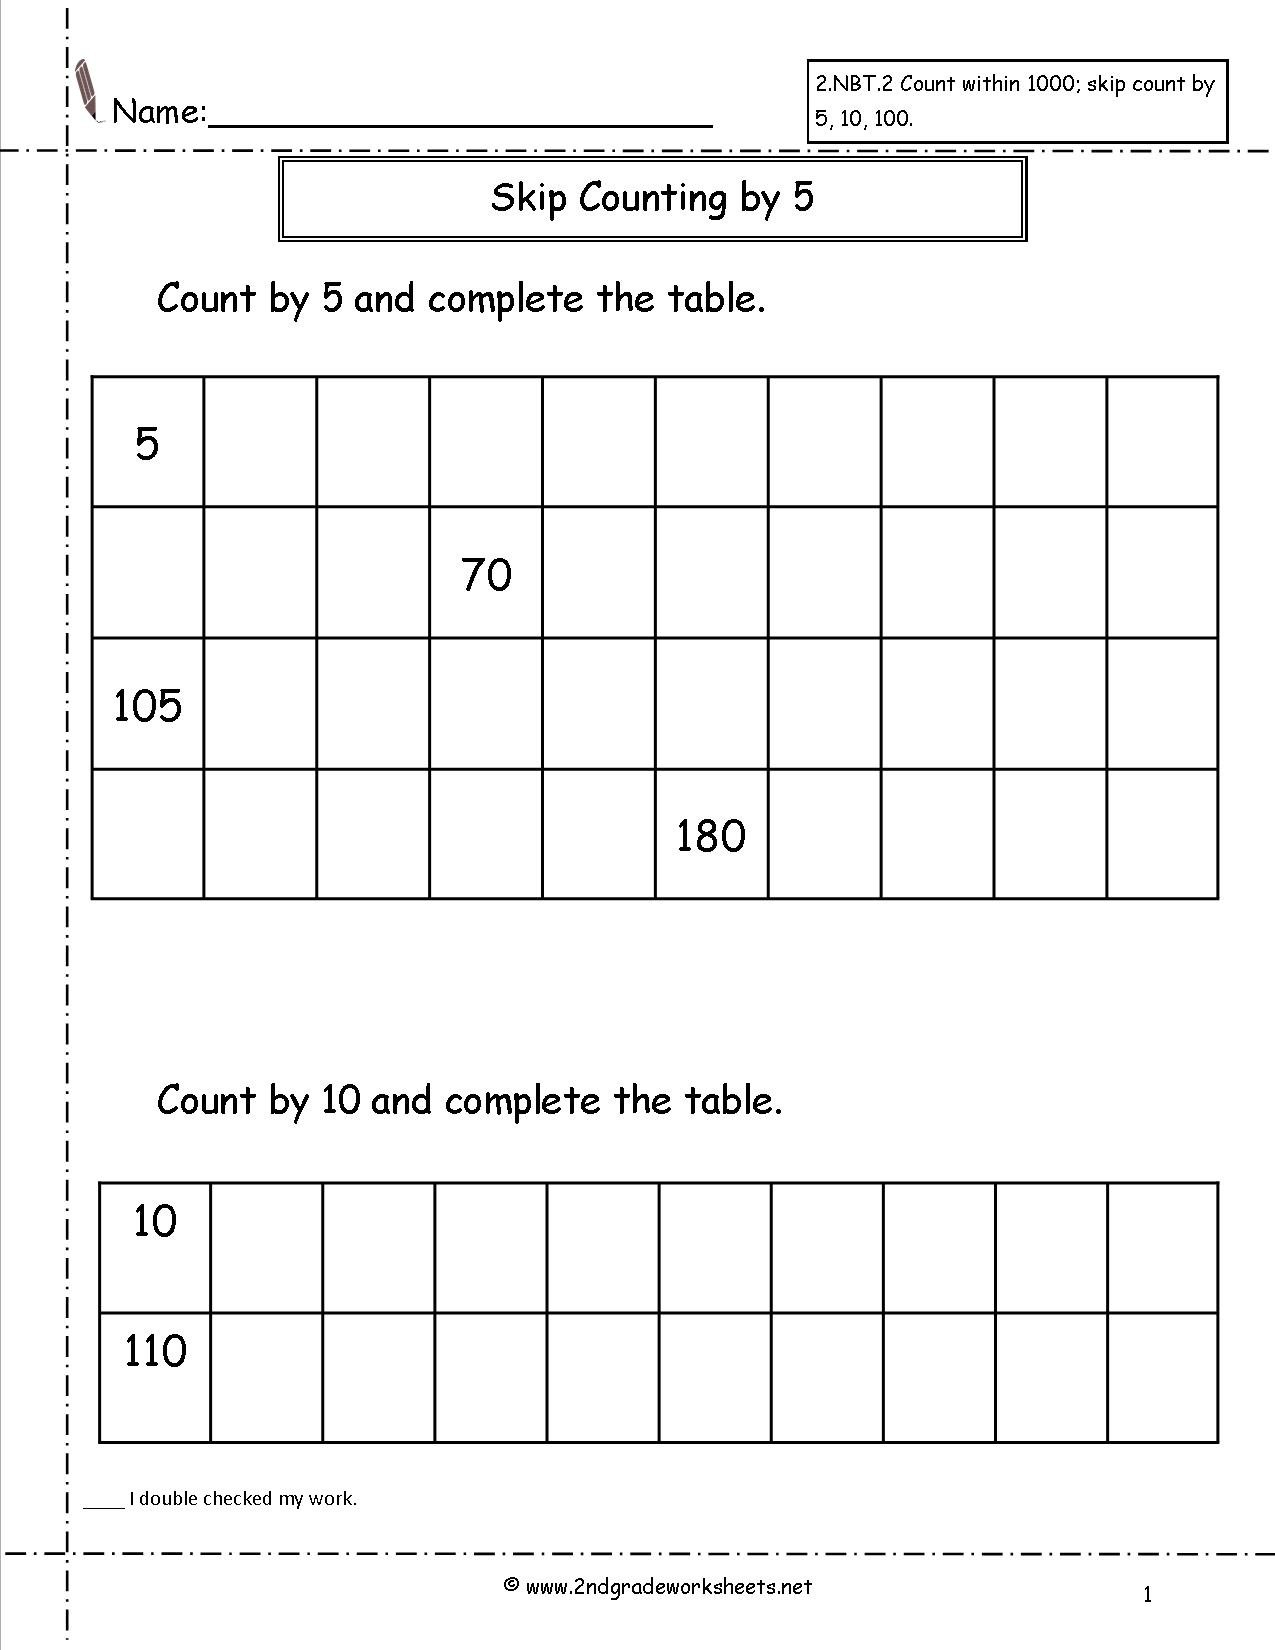 Free Skip Counting Worksheets Within Count By 5 Worksheet